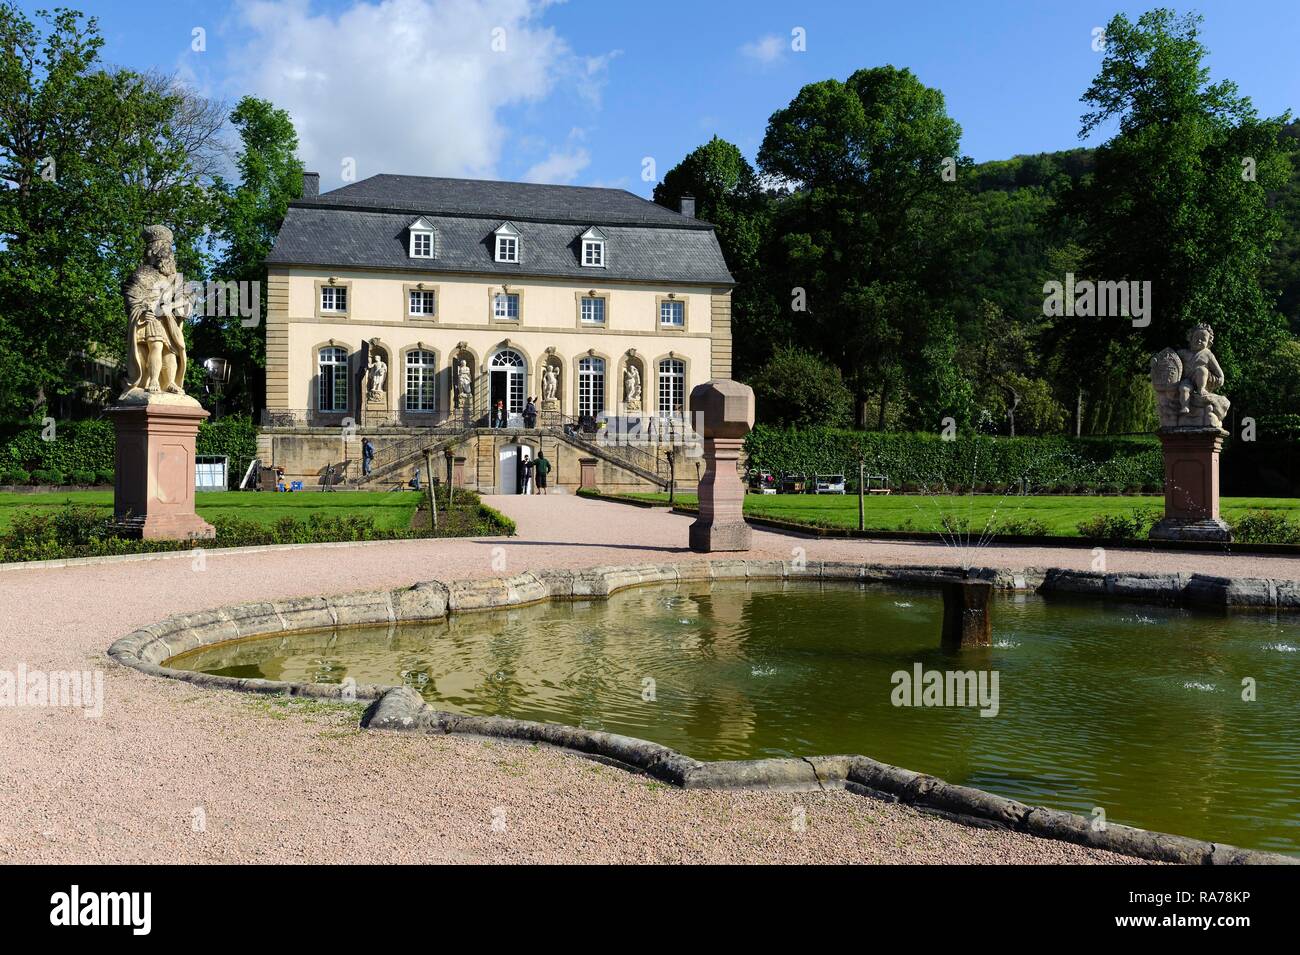 The orangery and the monastery gardens, Echternach, Luxembourg, Europe Stock Photo